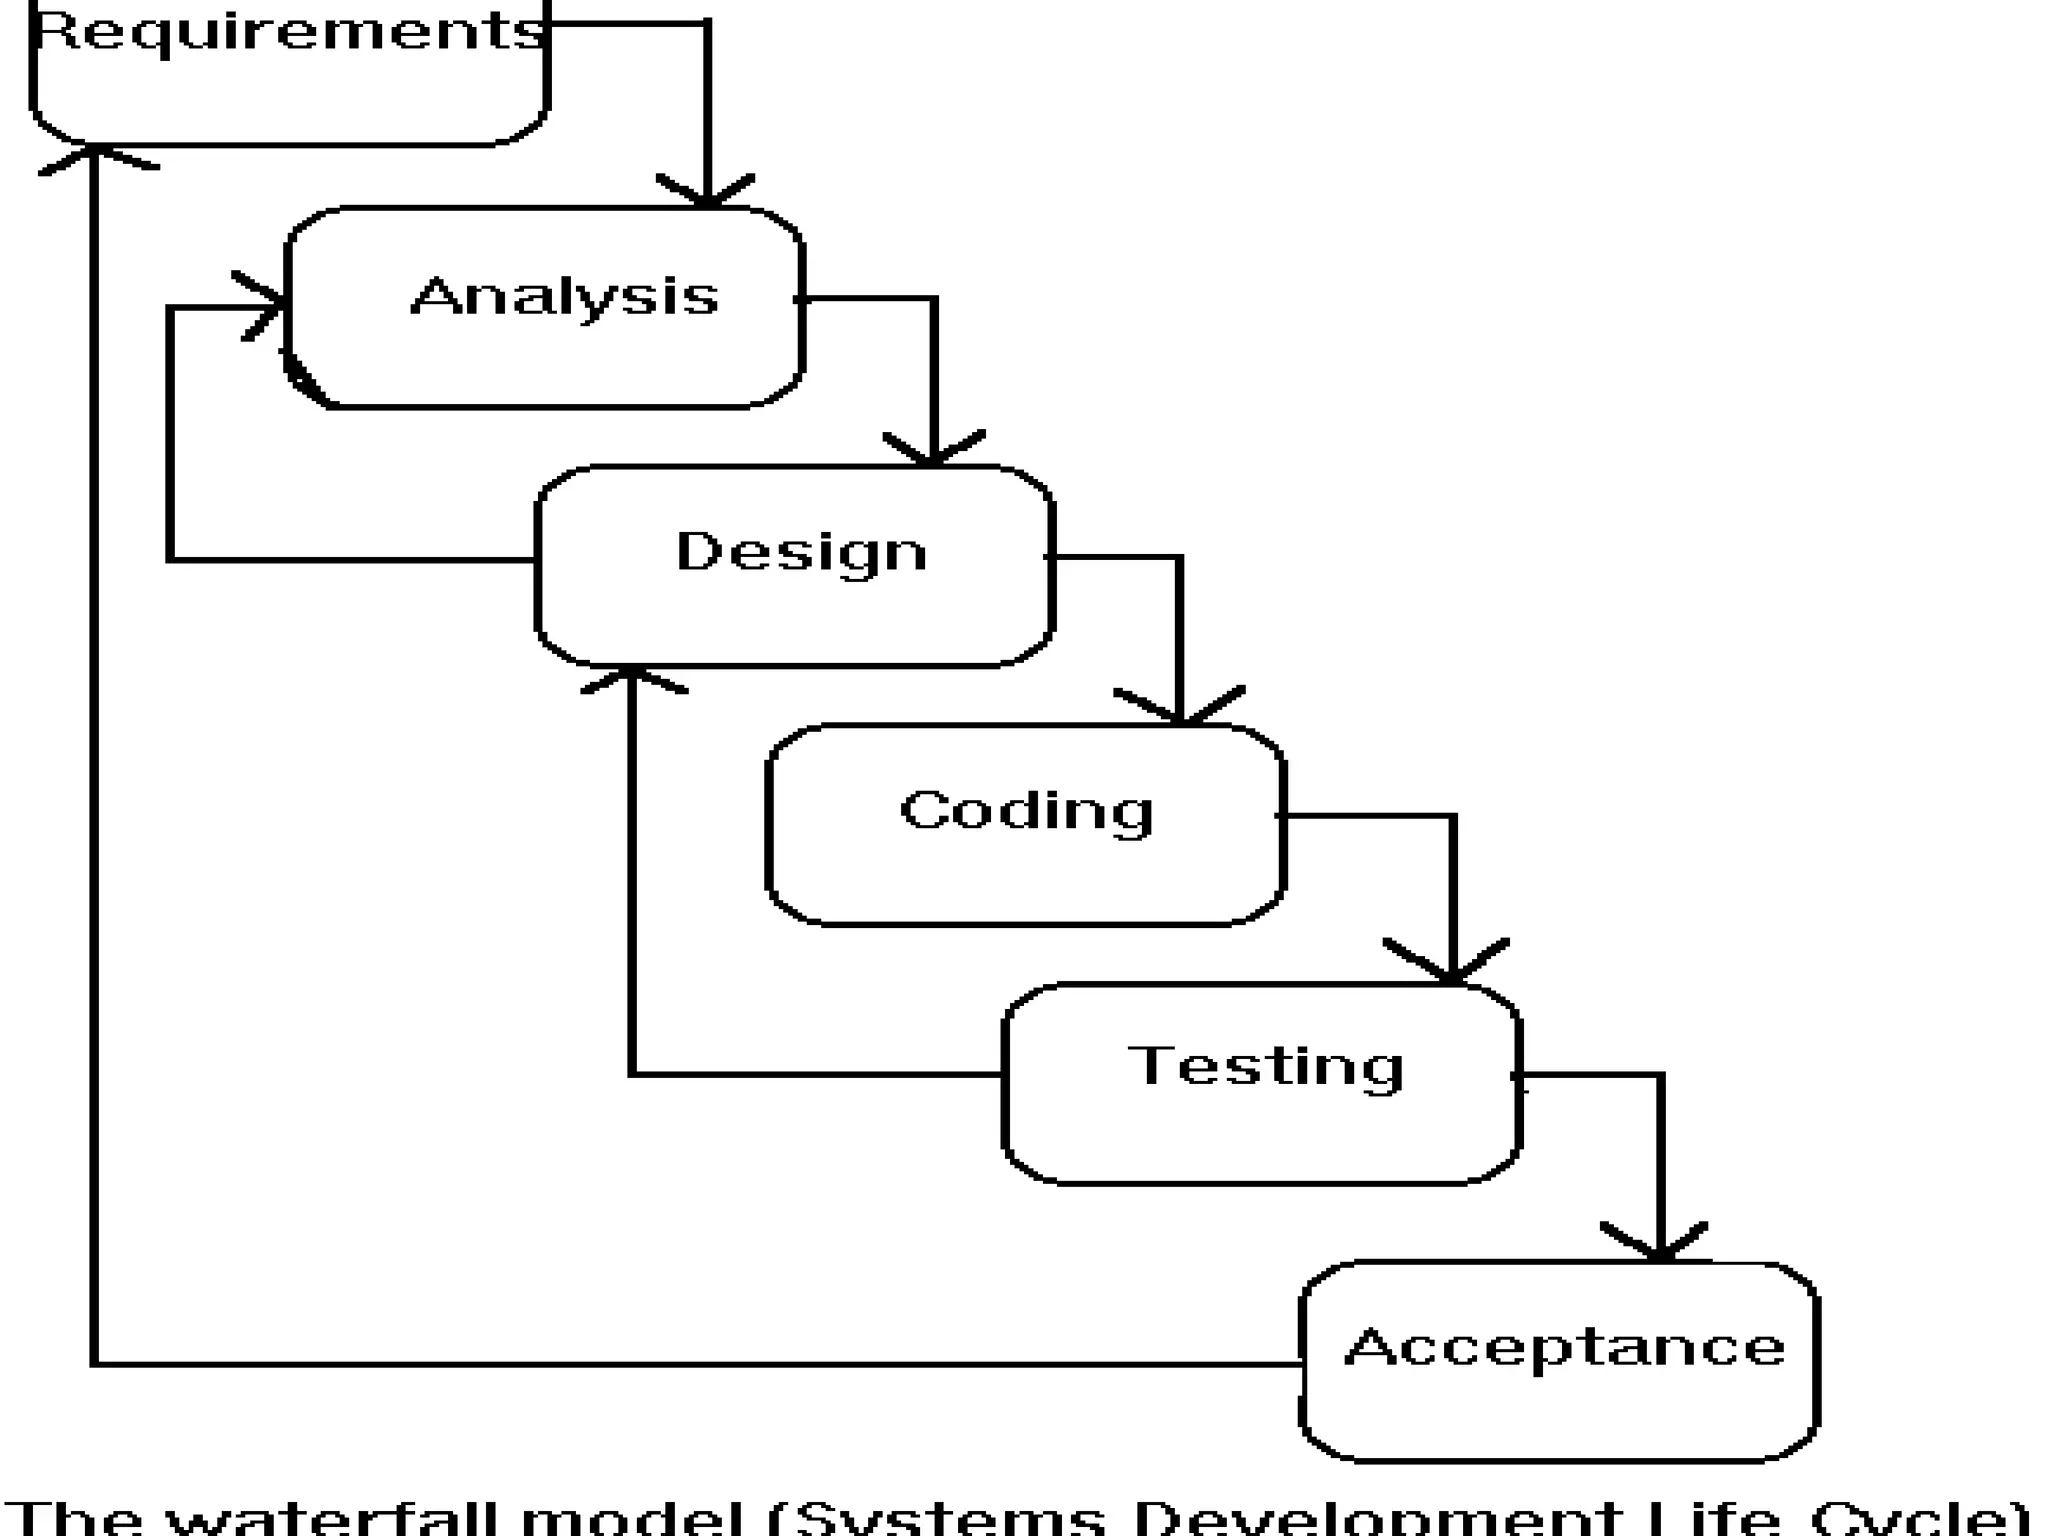 ppt on sOFTWARE DEVELOPMENT LIFE CYCLE